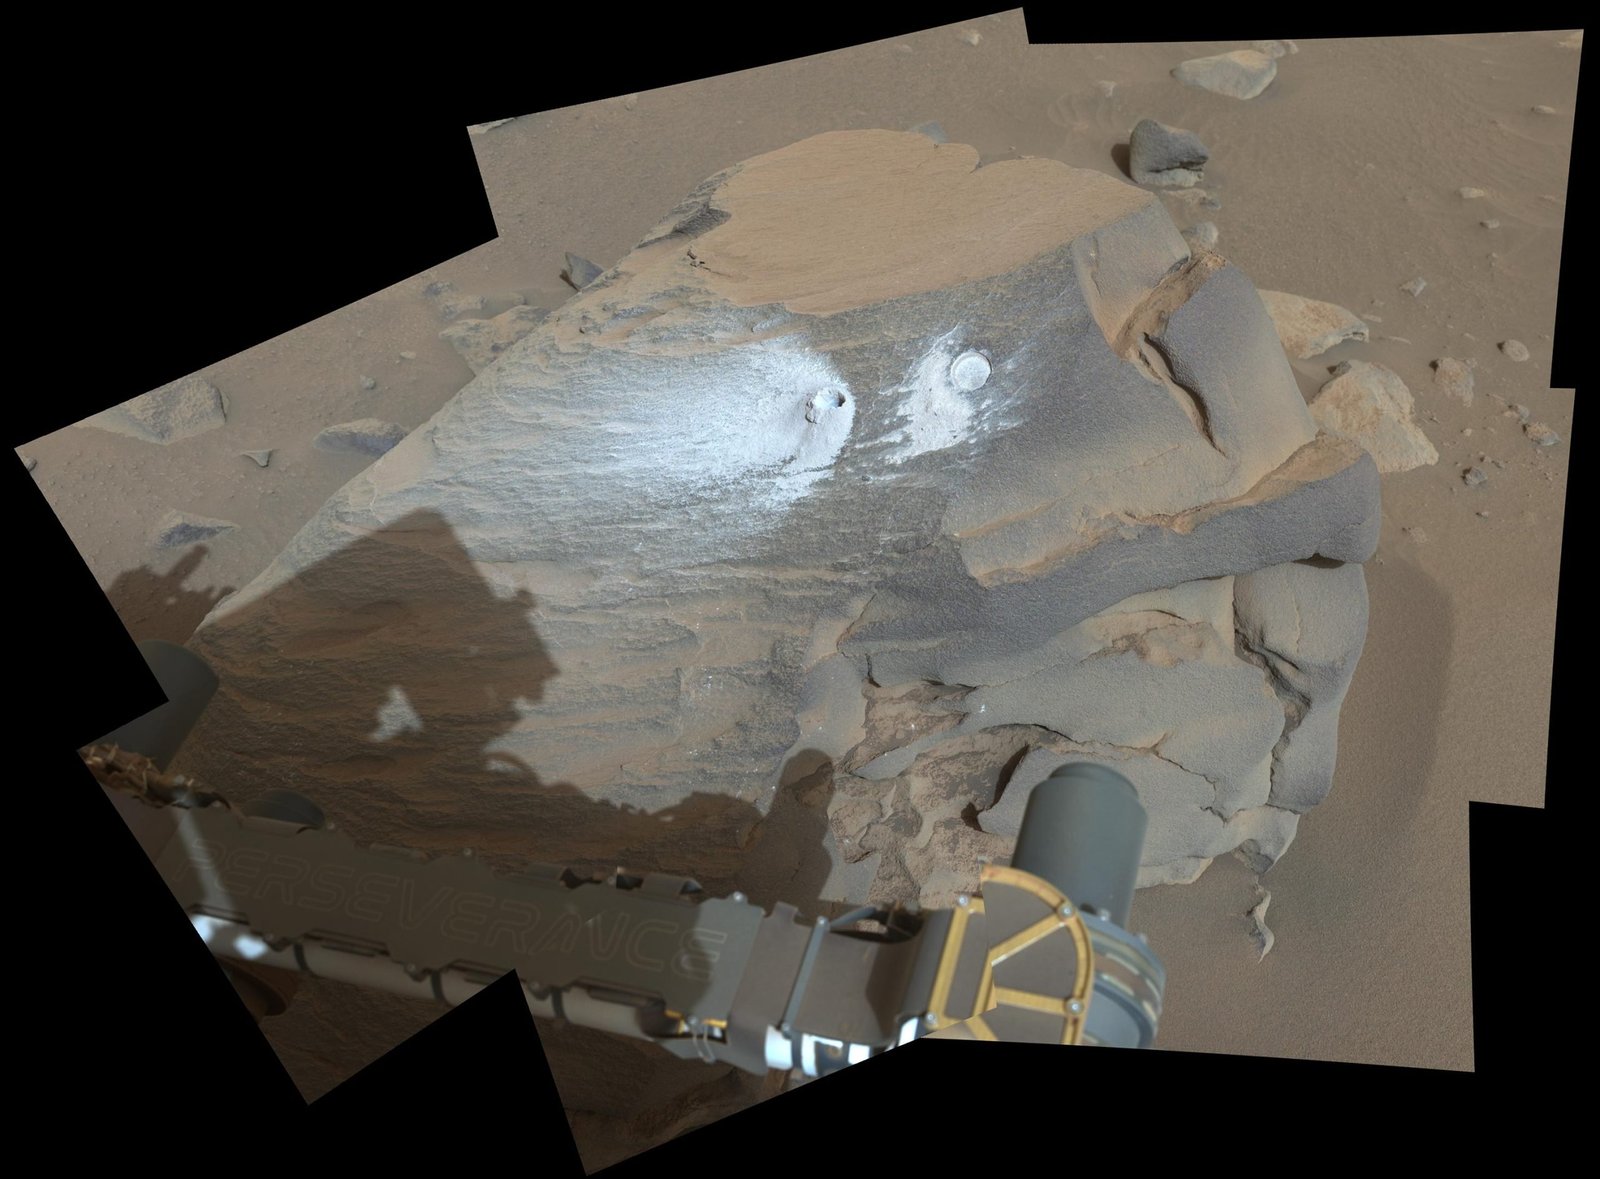 * NASA’s Perseverance Rover Hits the Mark – “This Is the Kind of Rock We Had Hoped To Find”